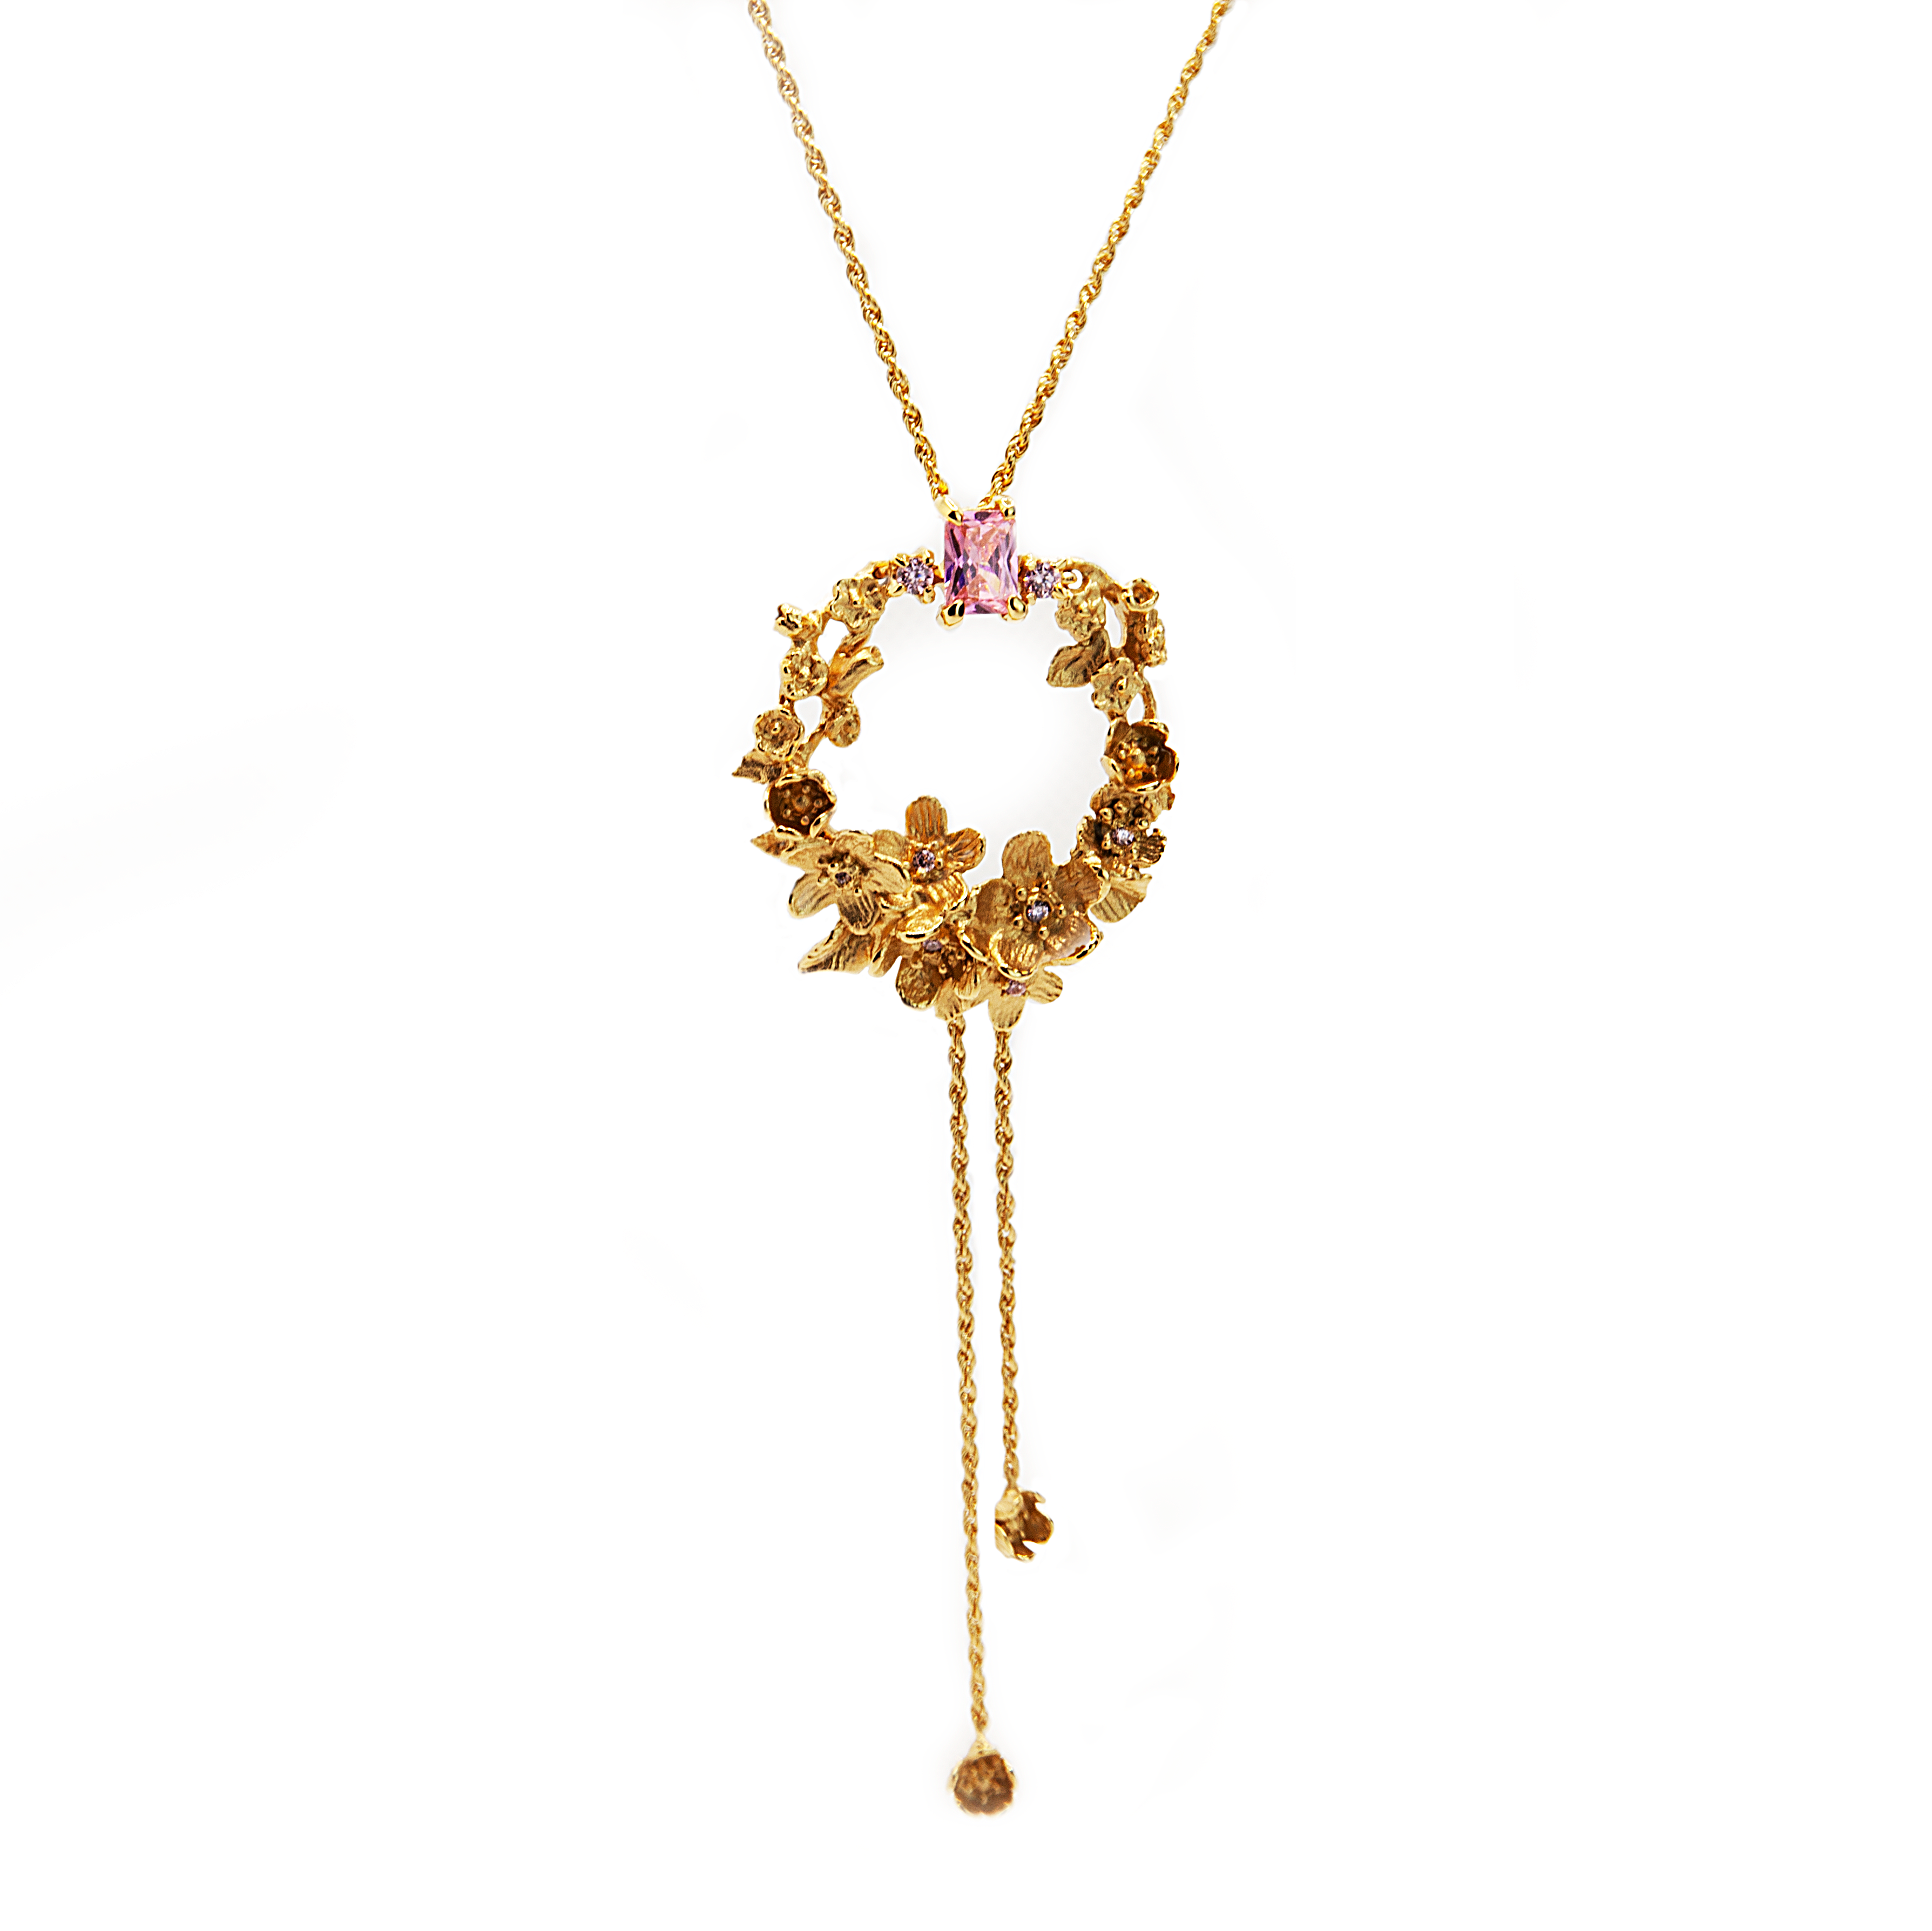 Single Cherry Blossom Pendant Necklace – National Archives Store